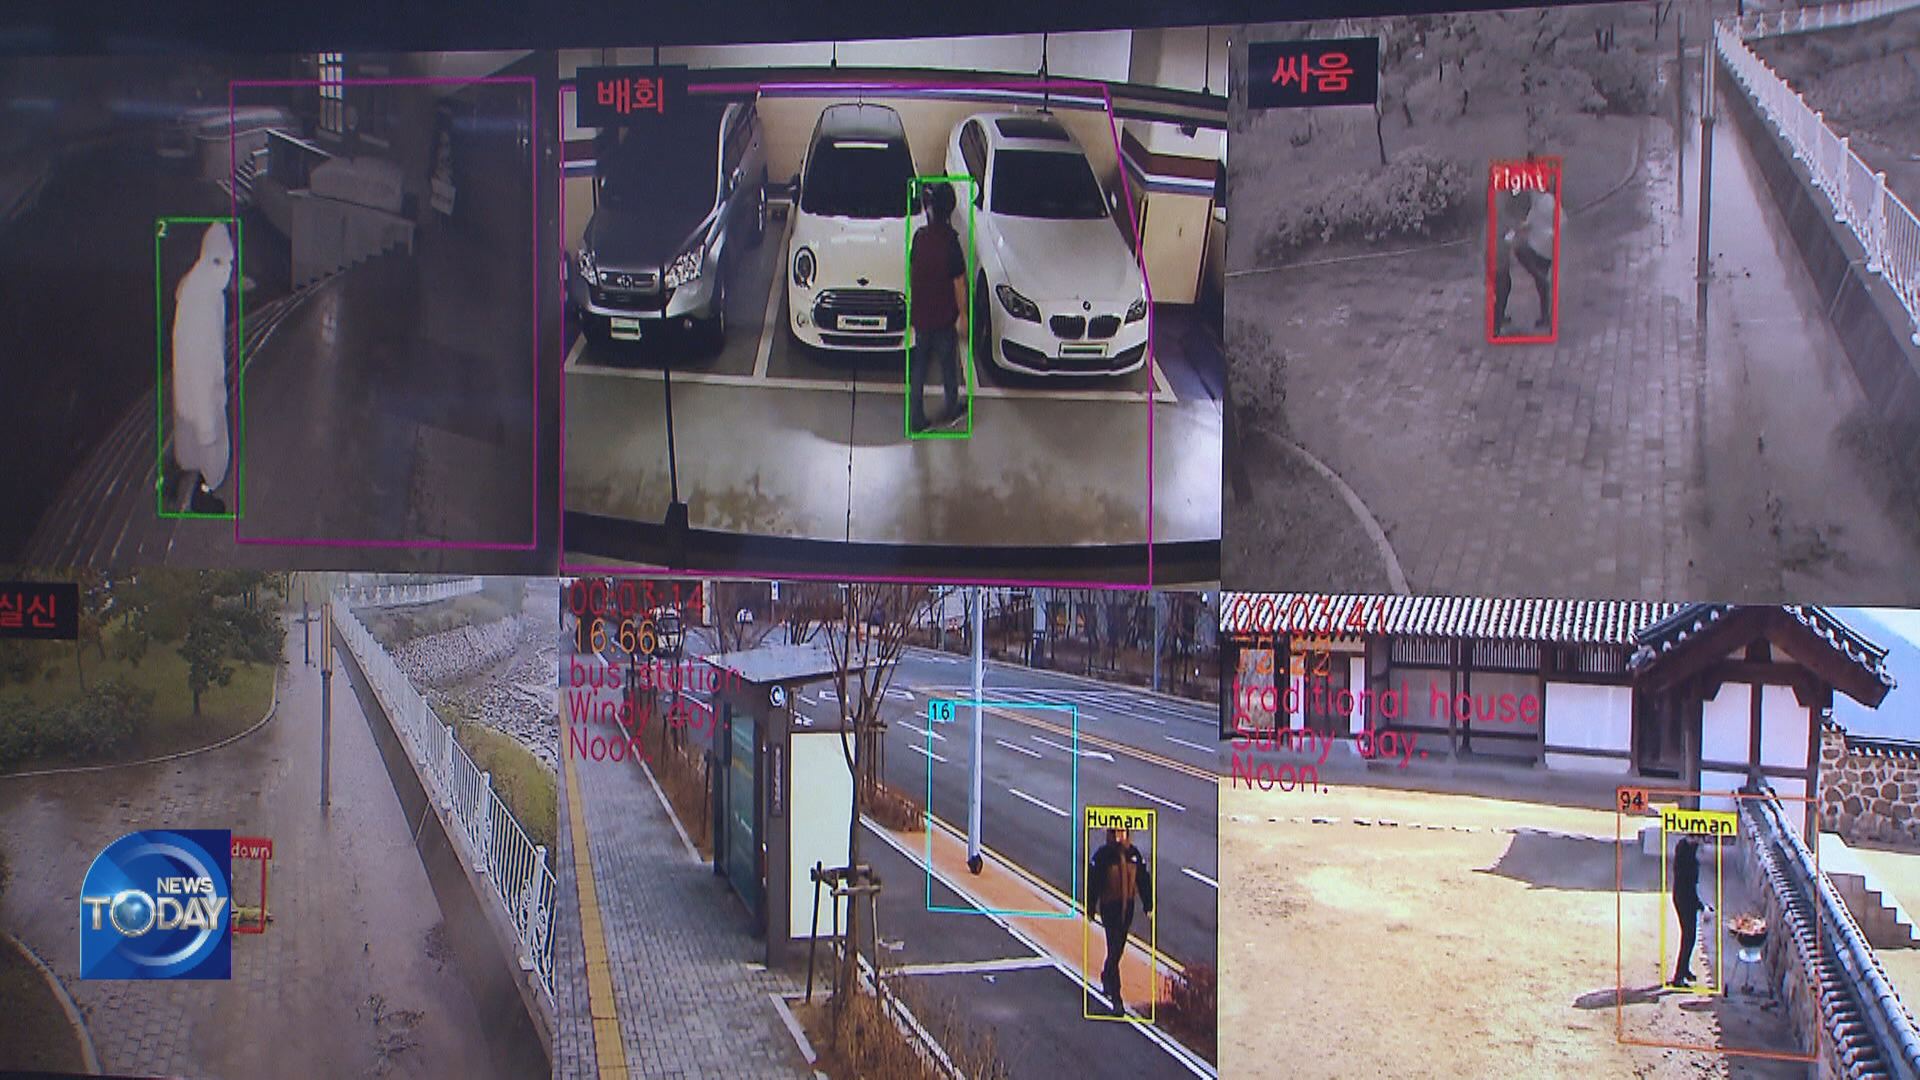 SMARTER CCTV RECOGNIZE HUMAN ACTIONS